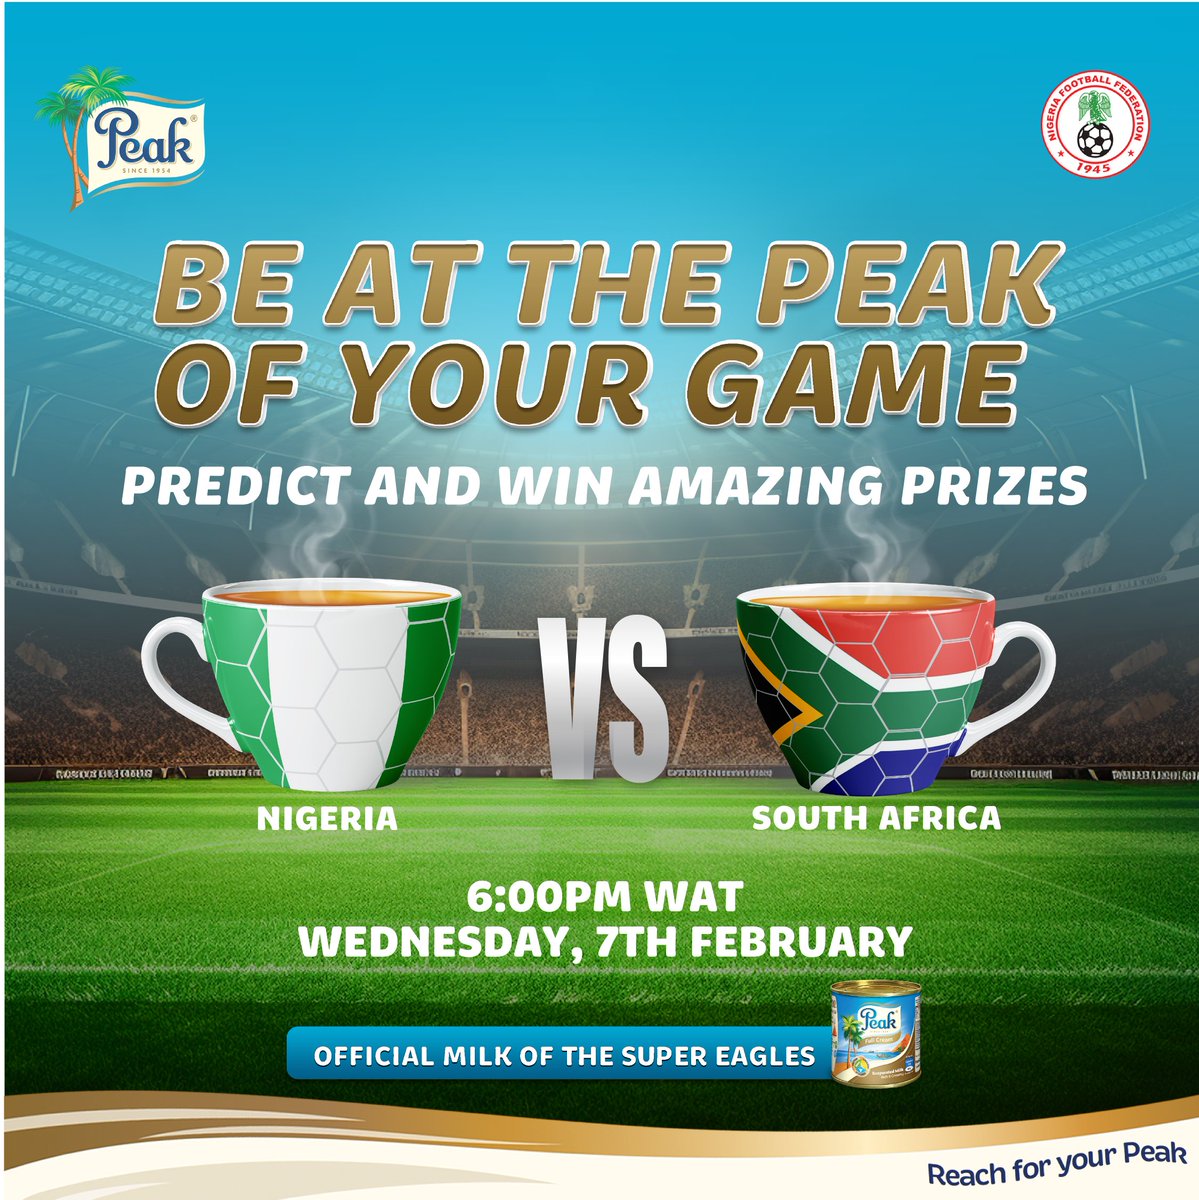 Can you correctly predict the score for tomorrow's match? Share your predictions in the comment section and stand a chance to win amazing prizes. Entry closes on Wednesday, February 7th by 4pm. #PeakMilk #SuperEagles